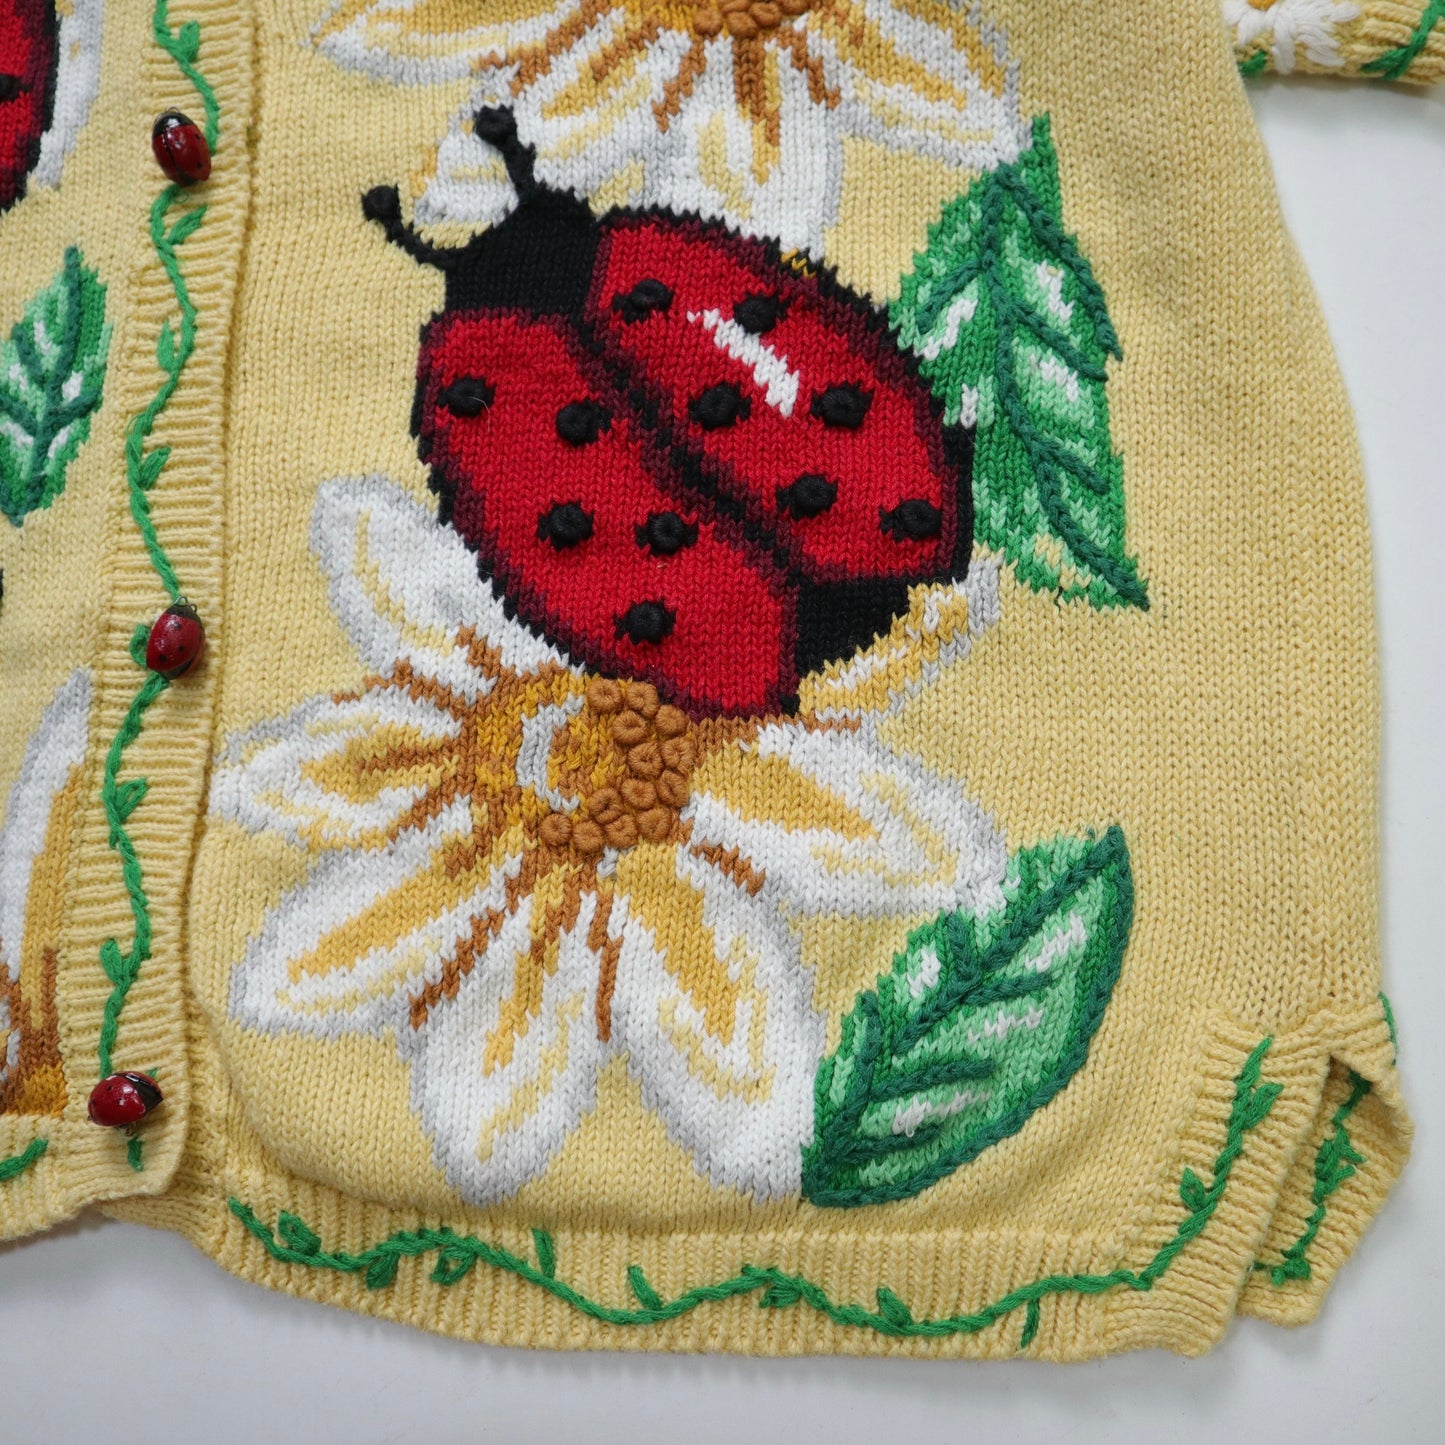 90s eagle's eye three-dimensional ladybug knitted top